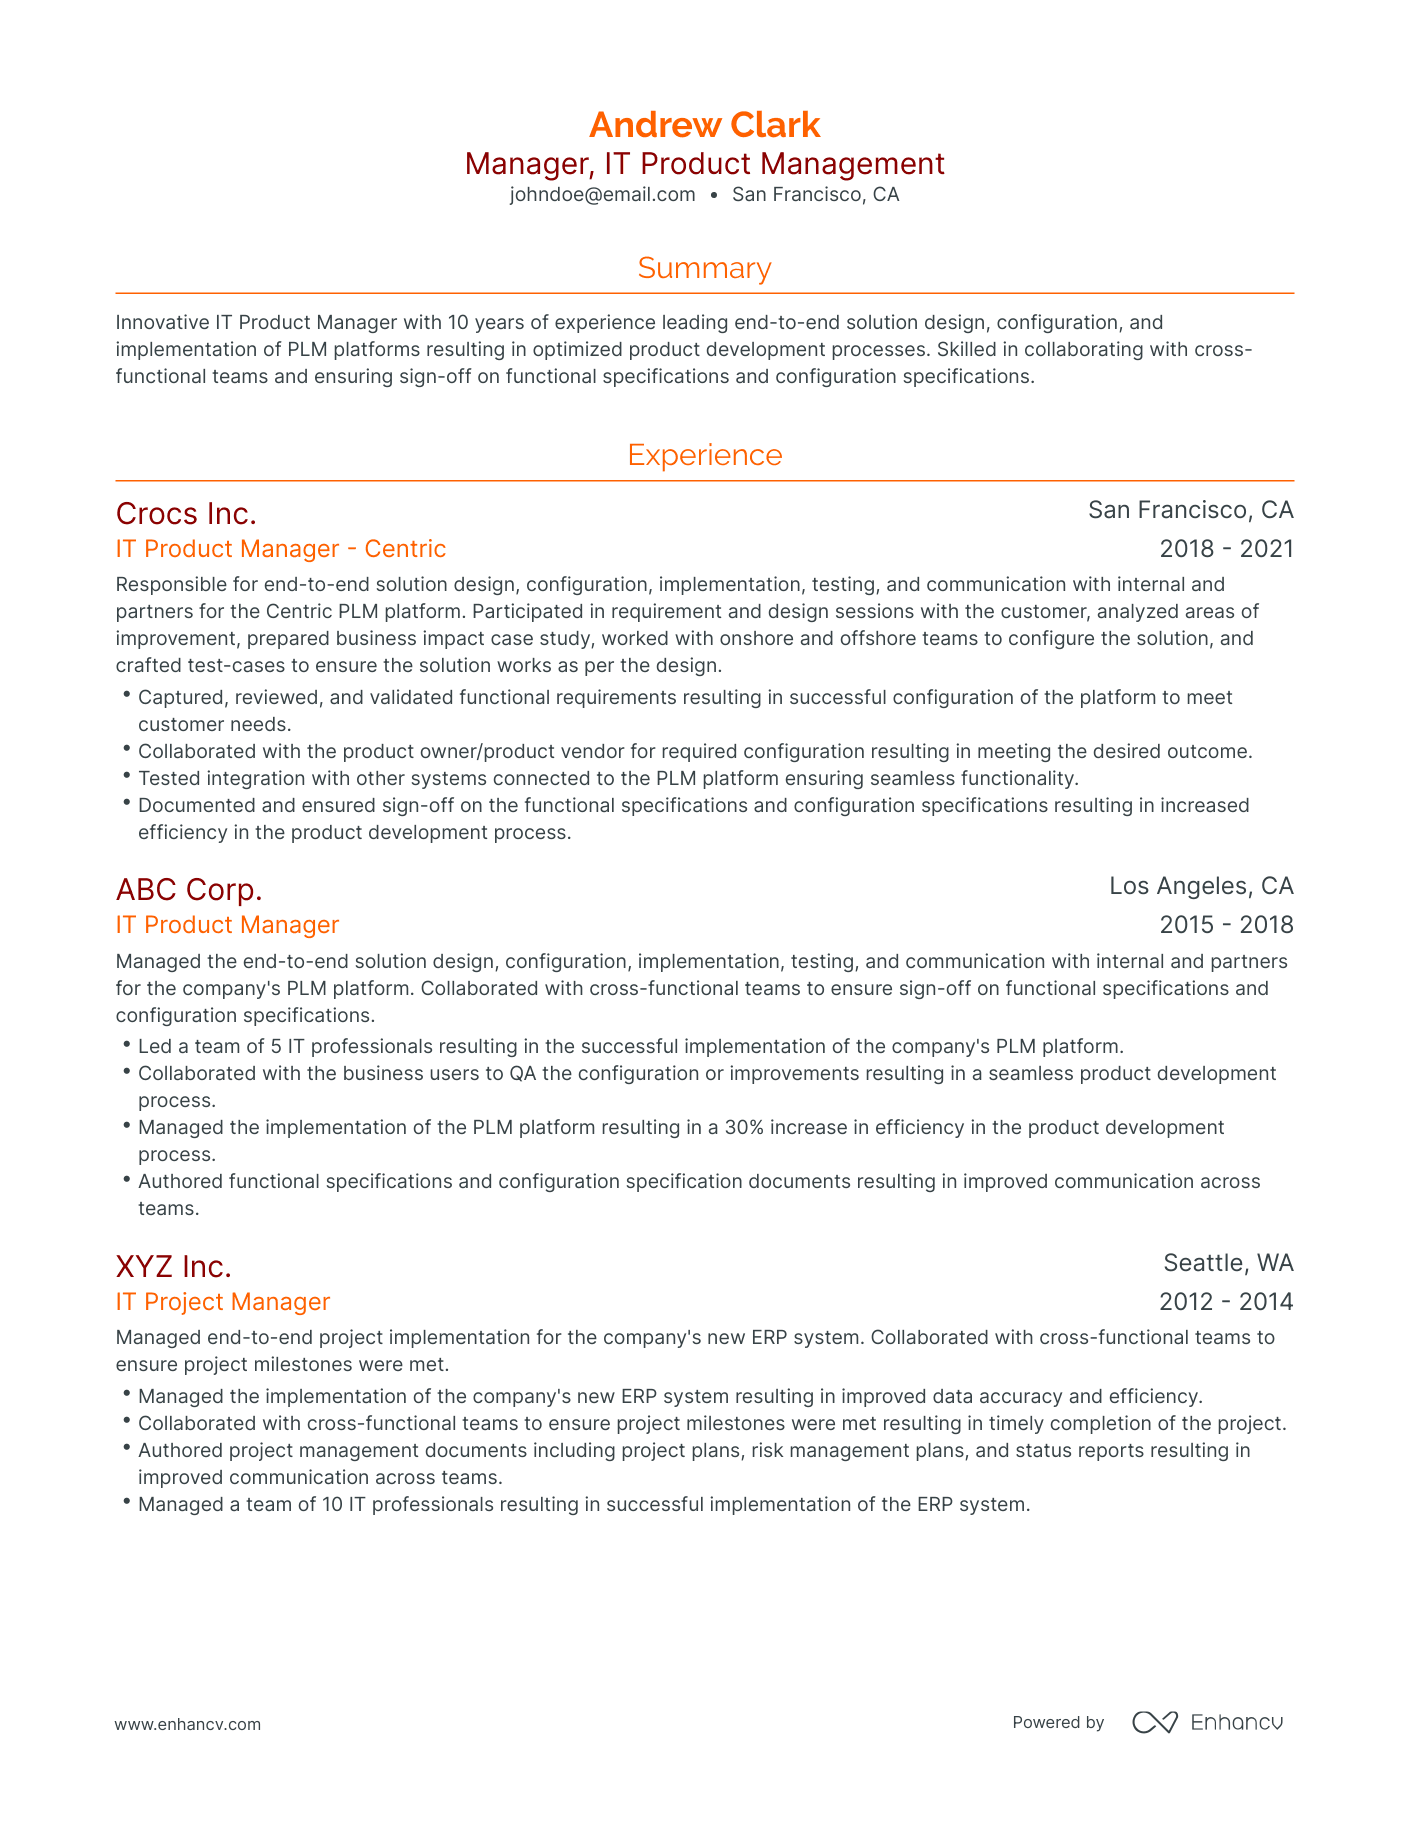 Traditional IT Product Manager Resume Template